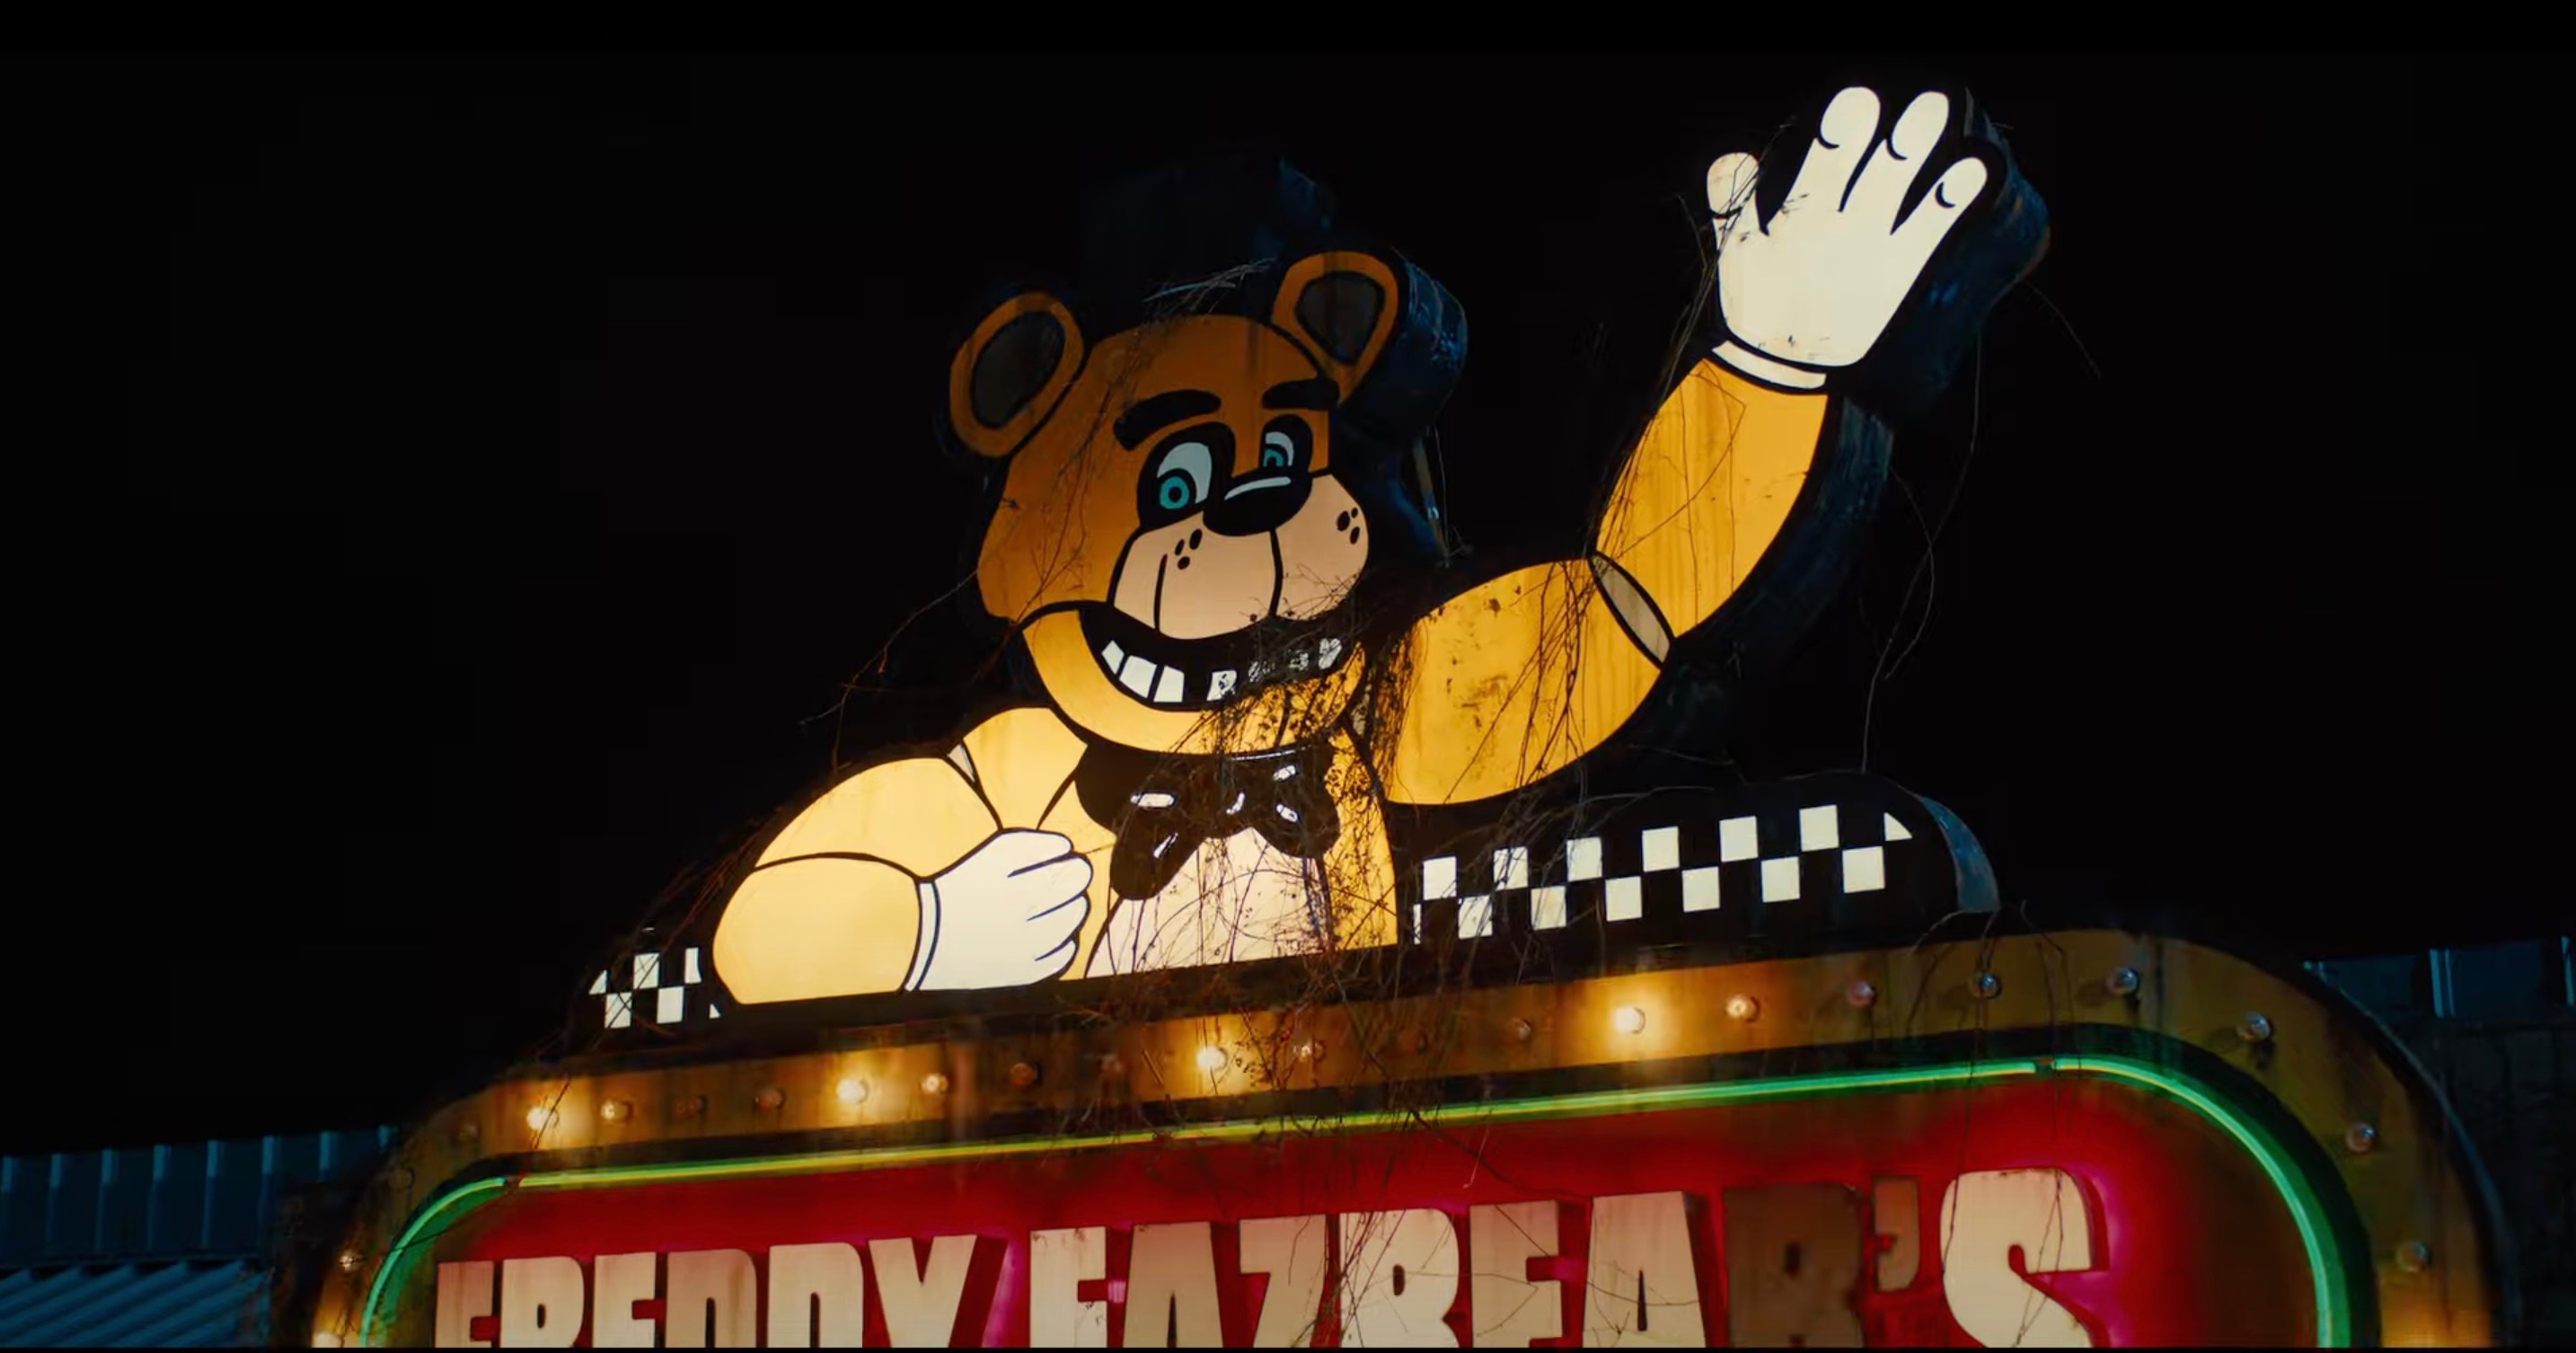 five nights at freddy's: Five Nights At Freddy's: Will the horror movie get  a sequel? - The Economic Times